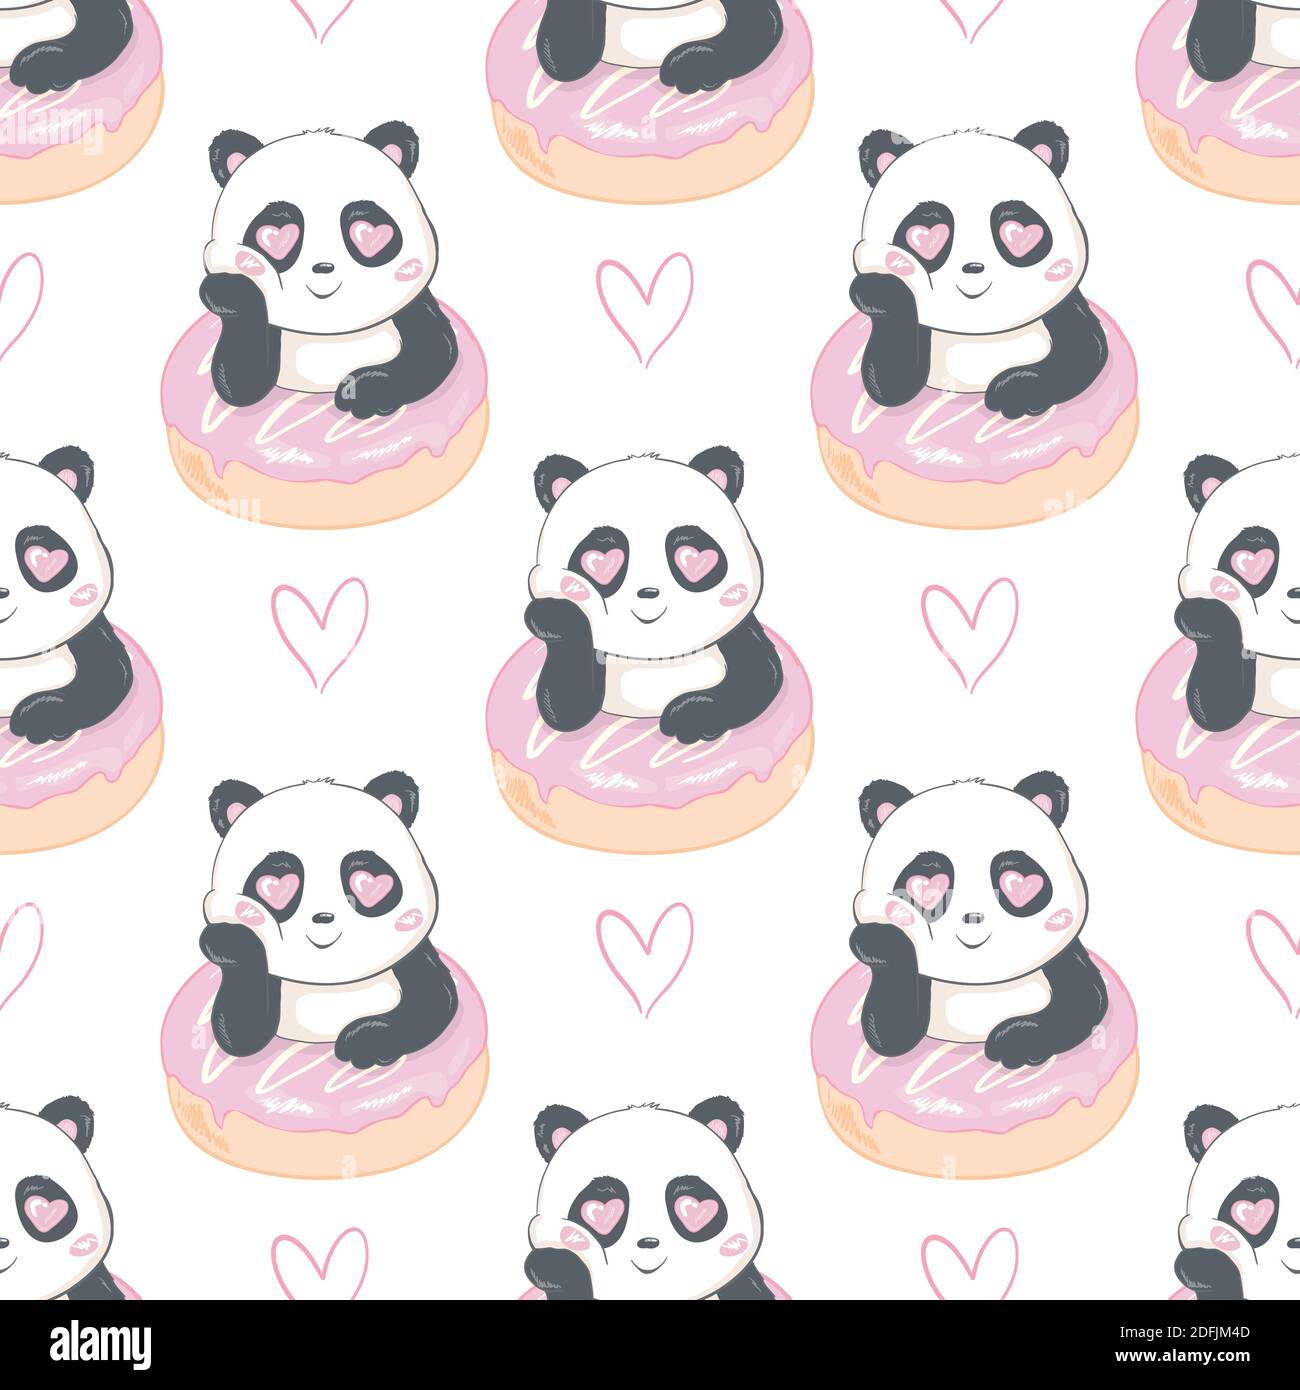 Beautiful panda holding a donut seamless pattern on a white background Stock Vector